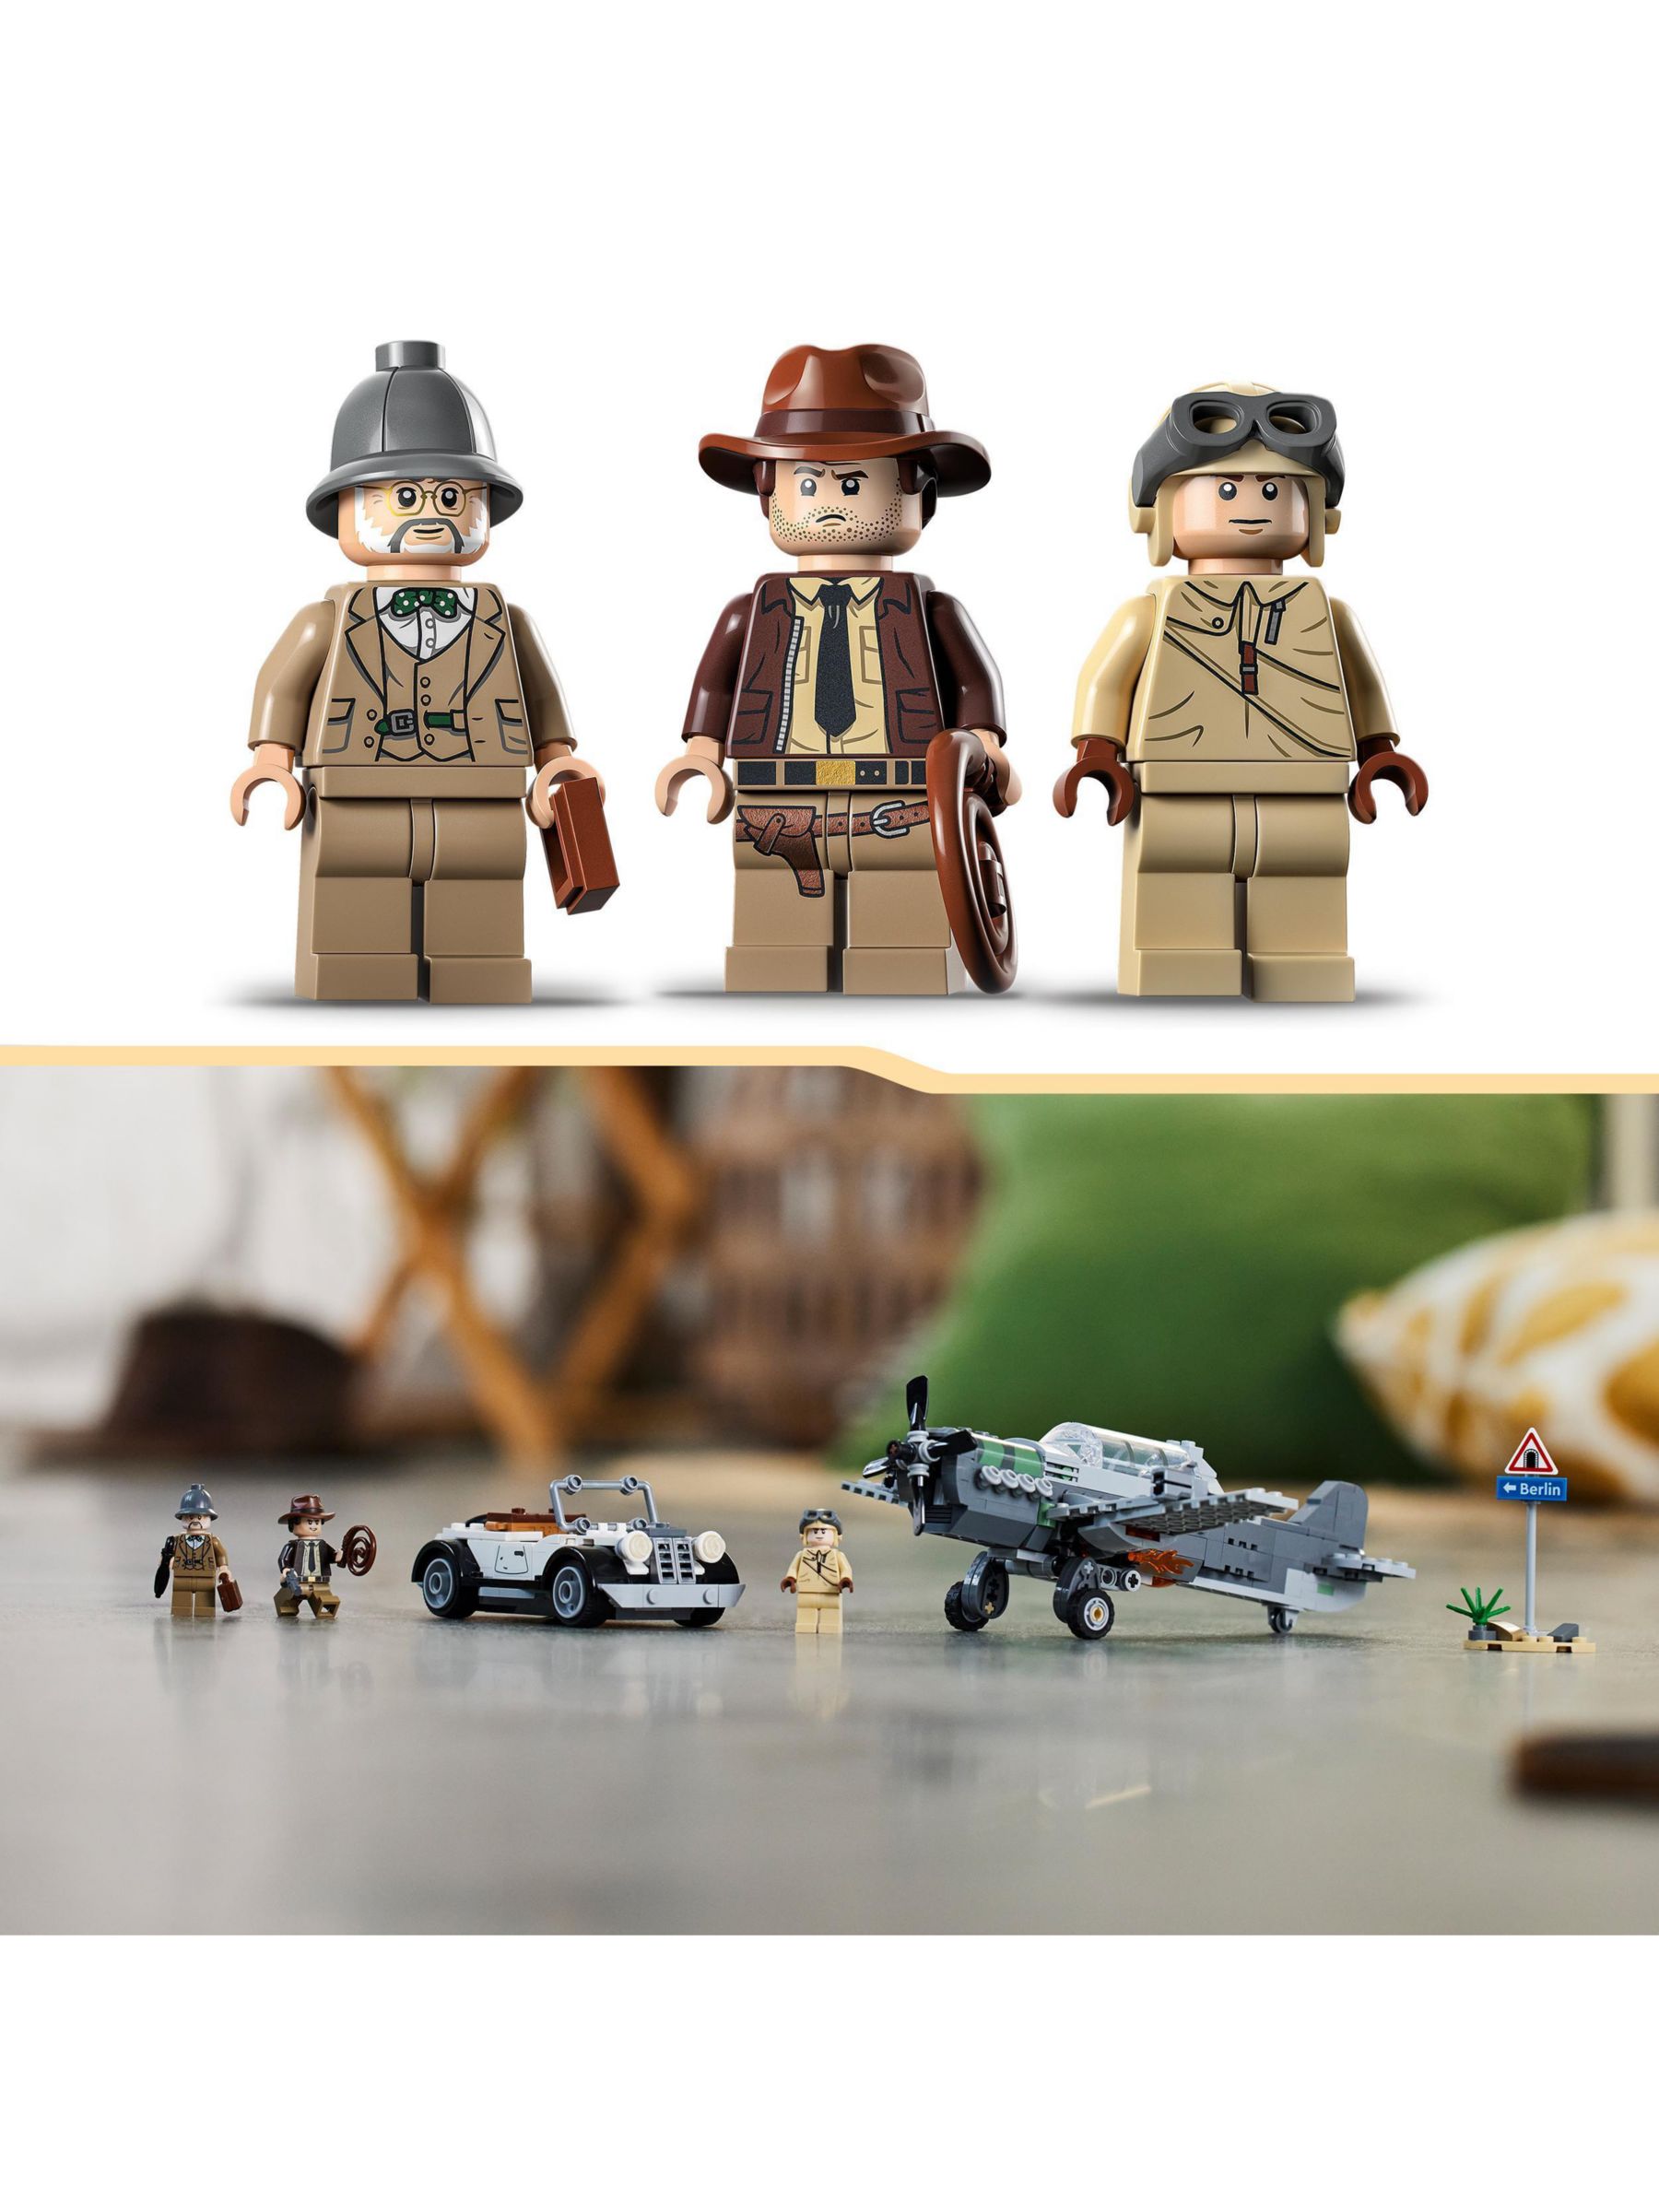 Lego Releases 3 New Indiana Jones Sets: Idol, Ark, Holy Grail